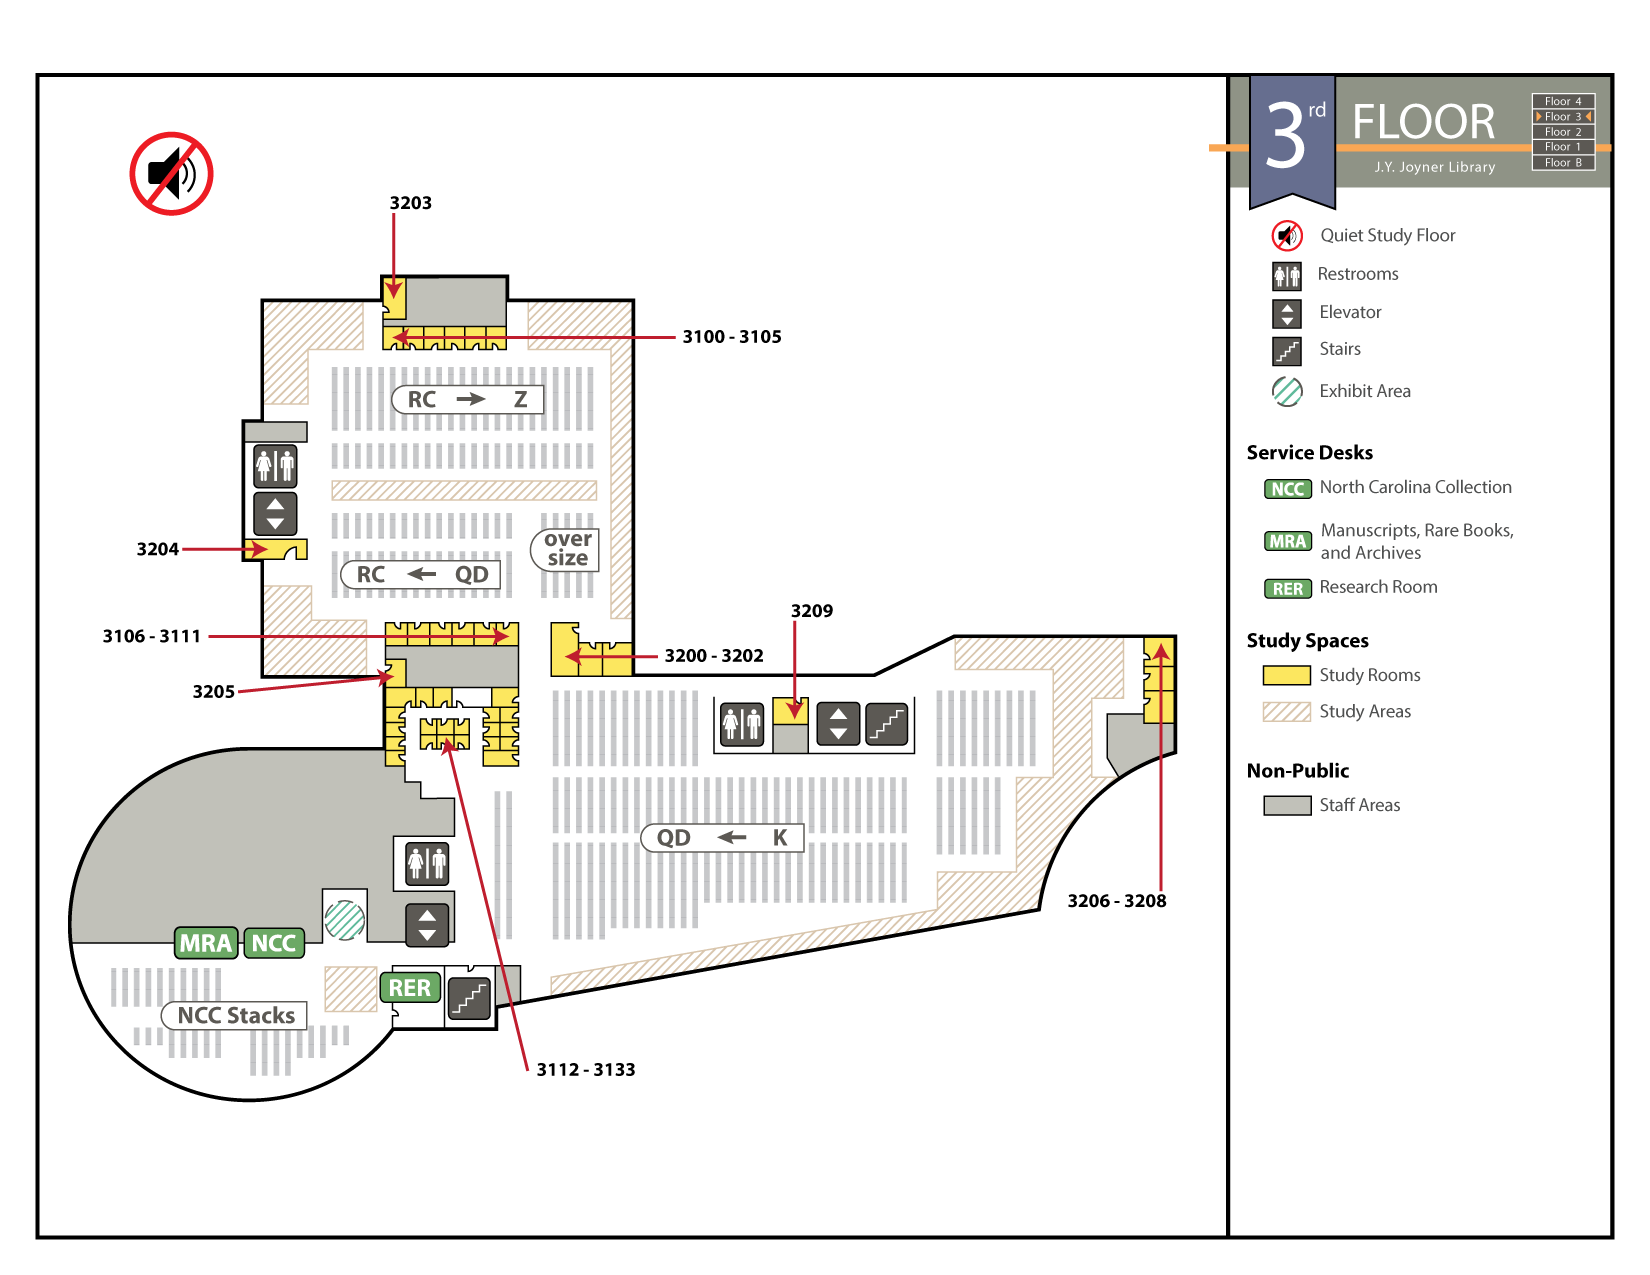 Map of 3rd floor; Special Collections is in the "drum" (the round room in the southwest corner)